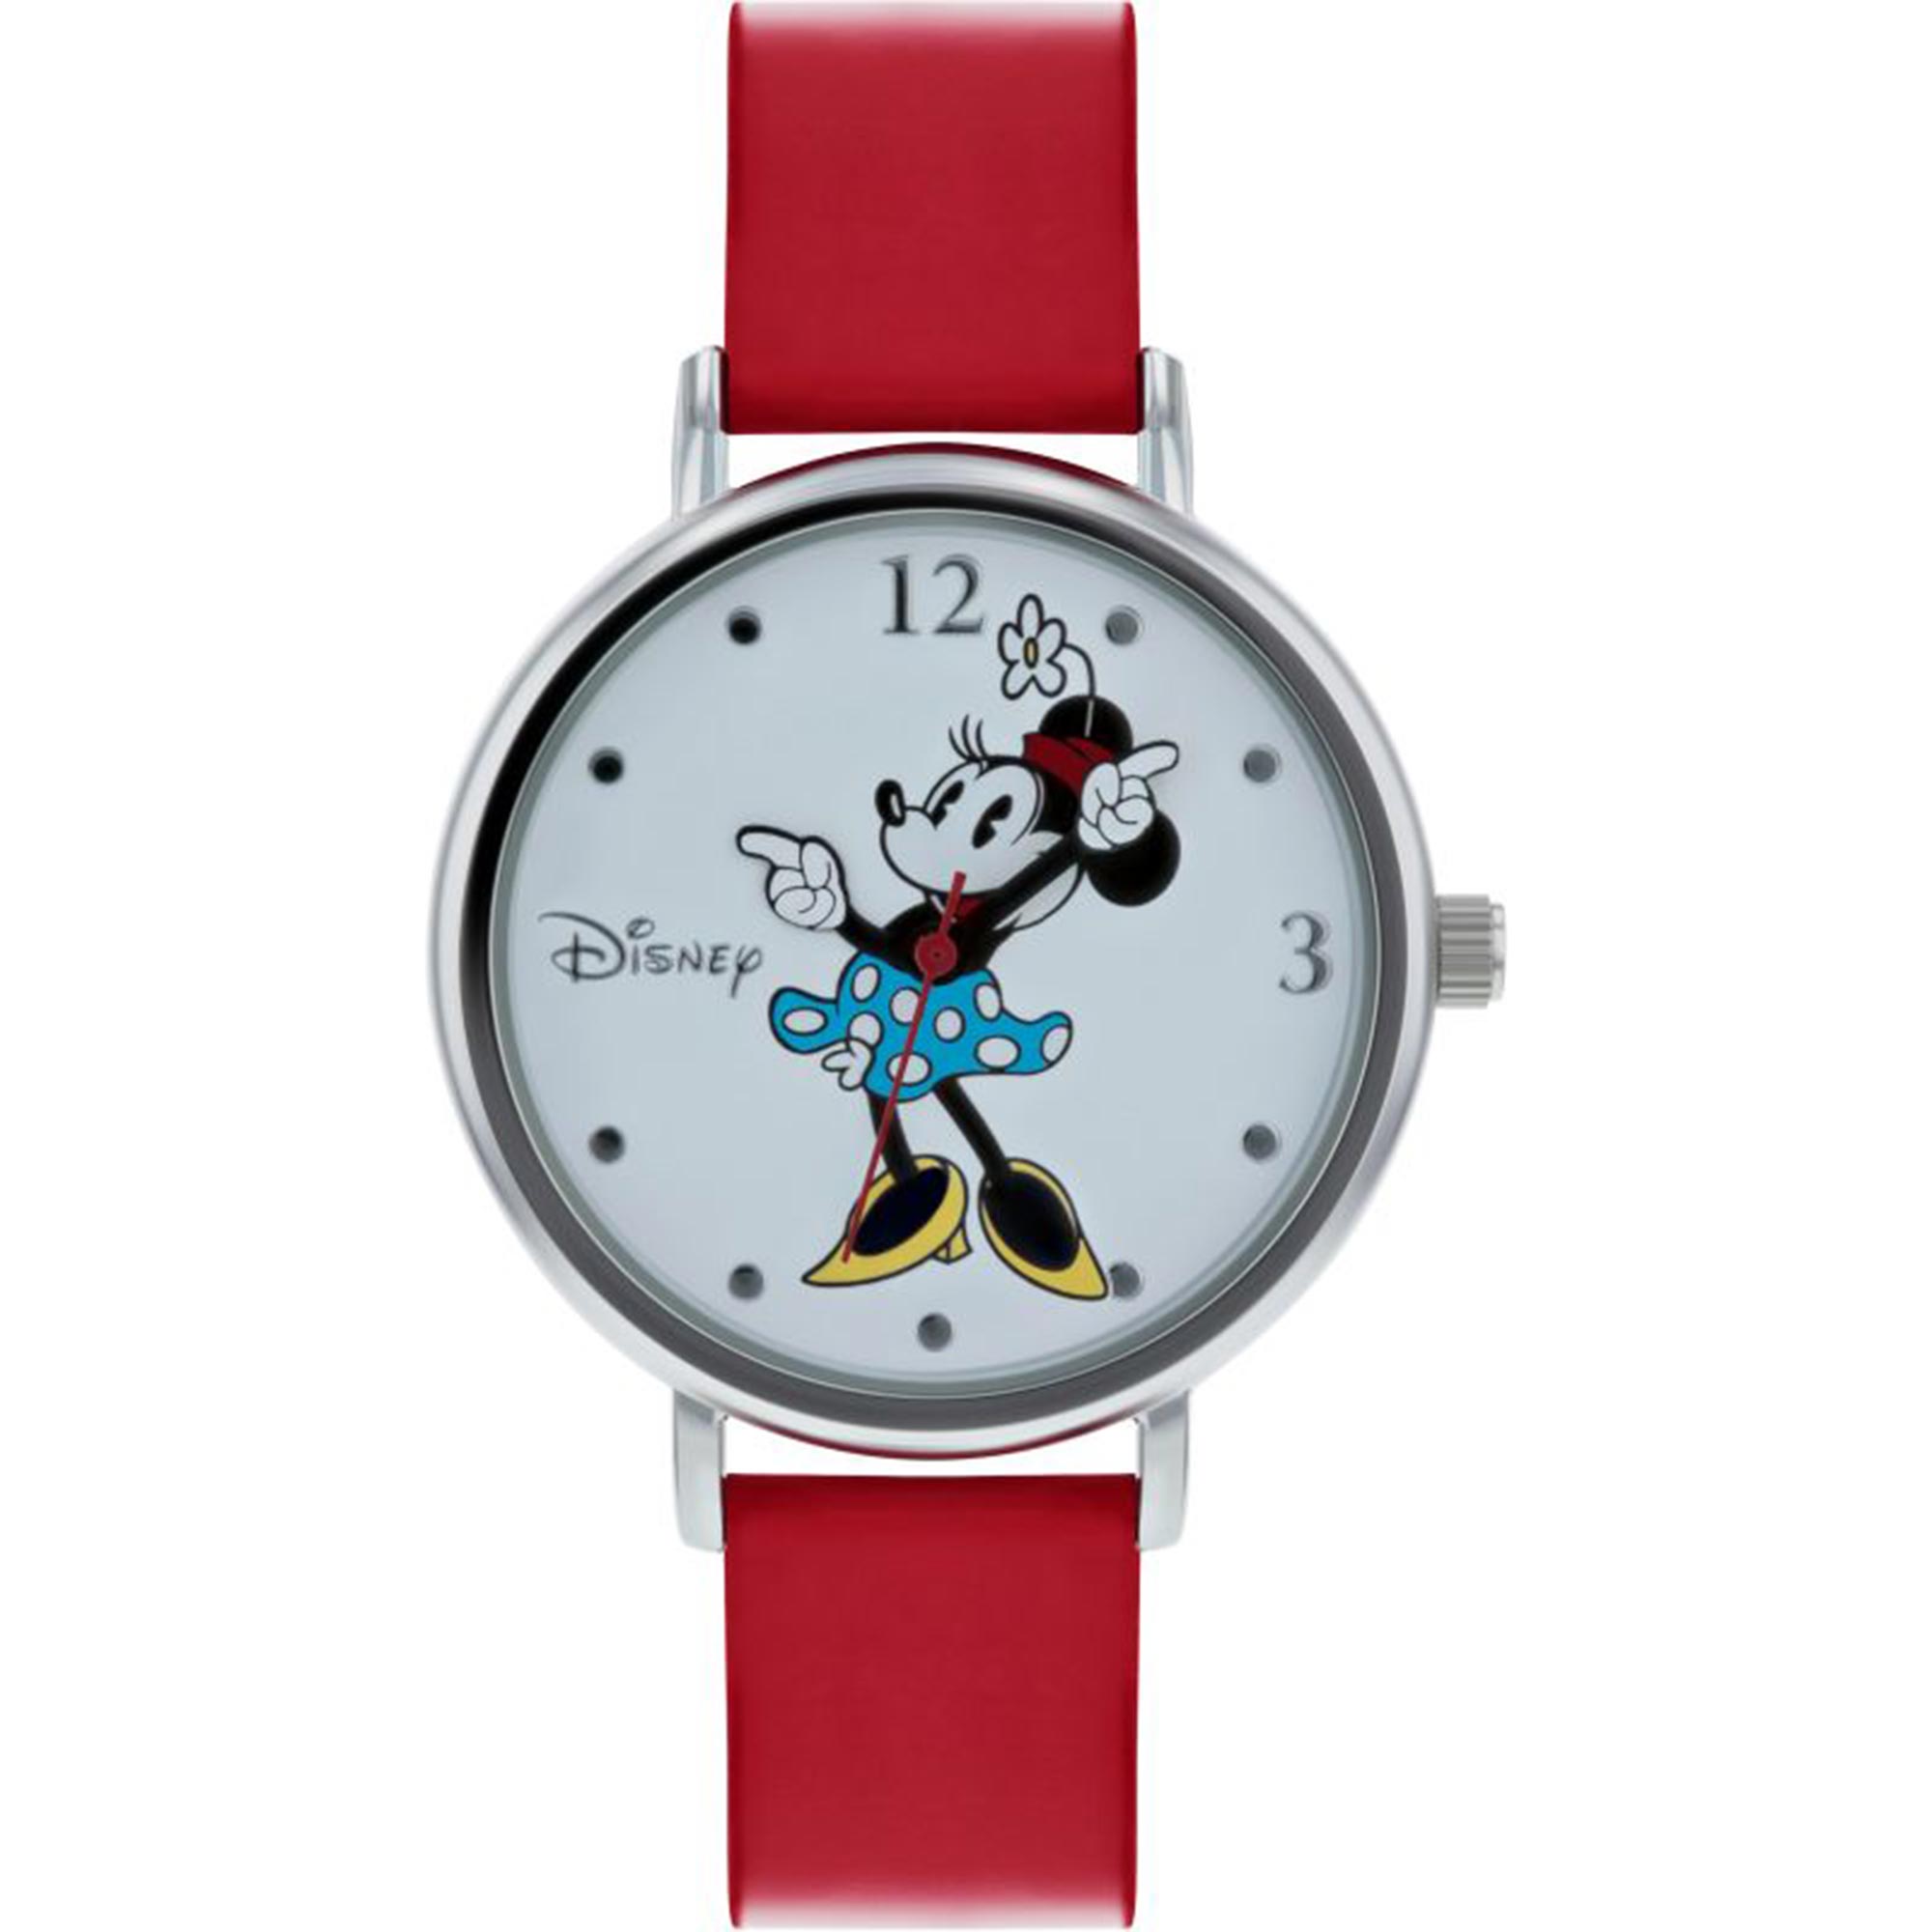 Disney Minnie Mouse Quartz Silver Dial Red Leather Strap Girls Watch Mn1302